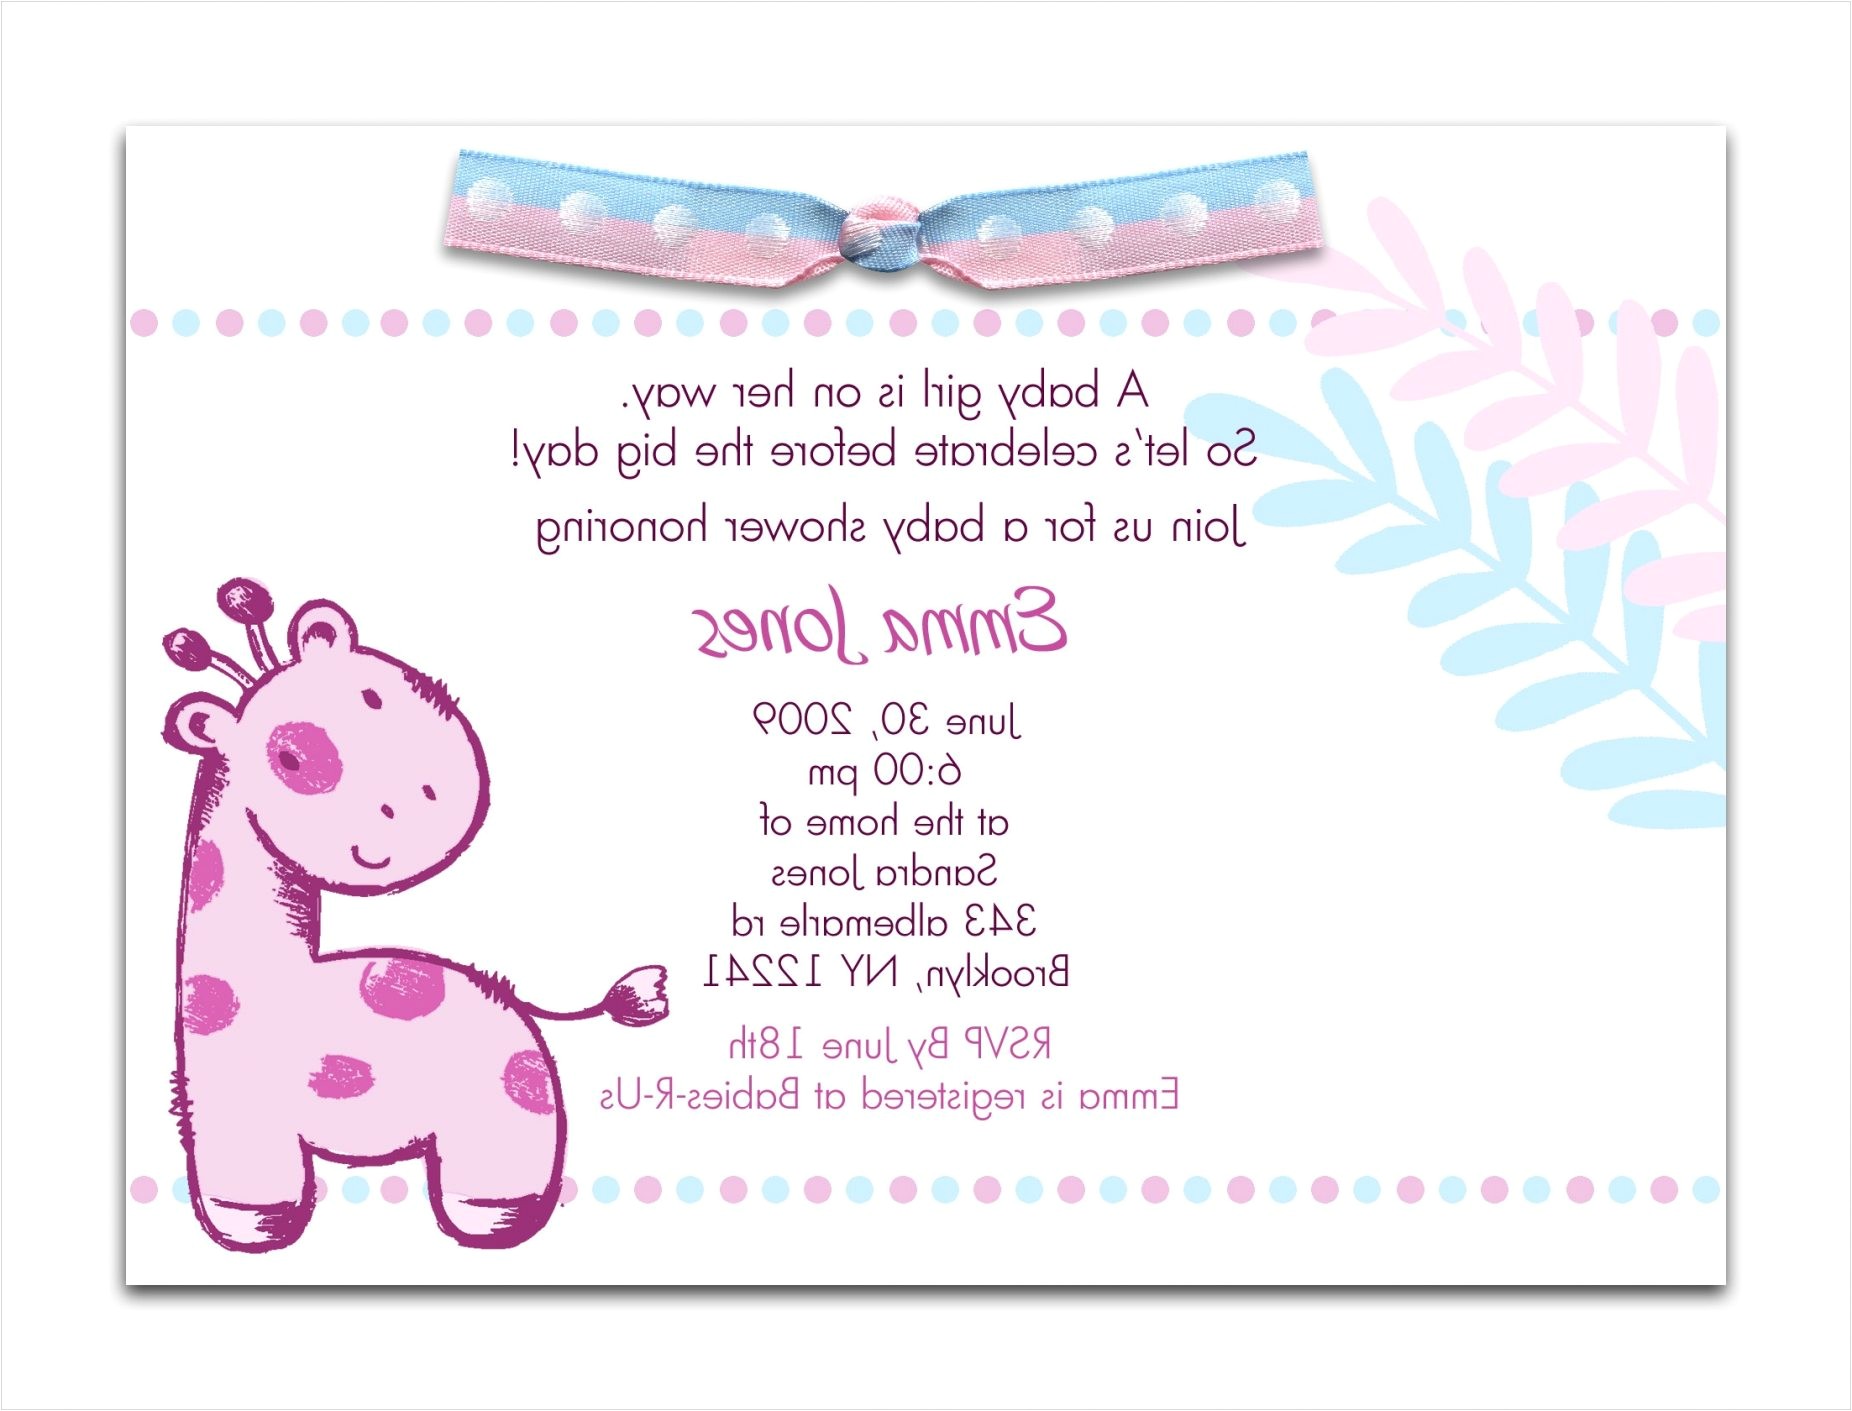 Sample Wording for Baby Shower Invitations Baby Shower Invitation Wording Examples Sample Baby Shower